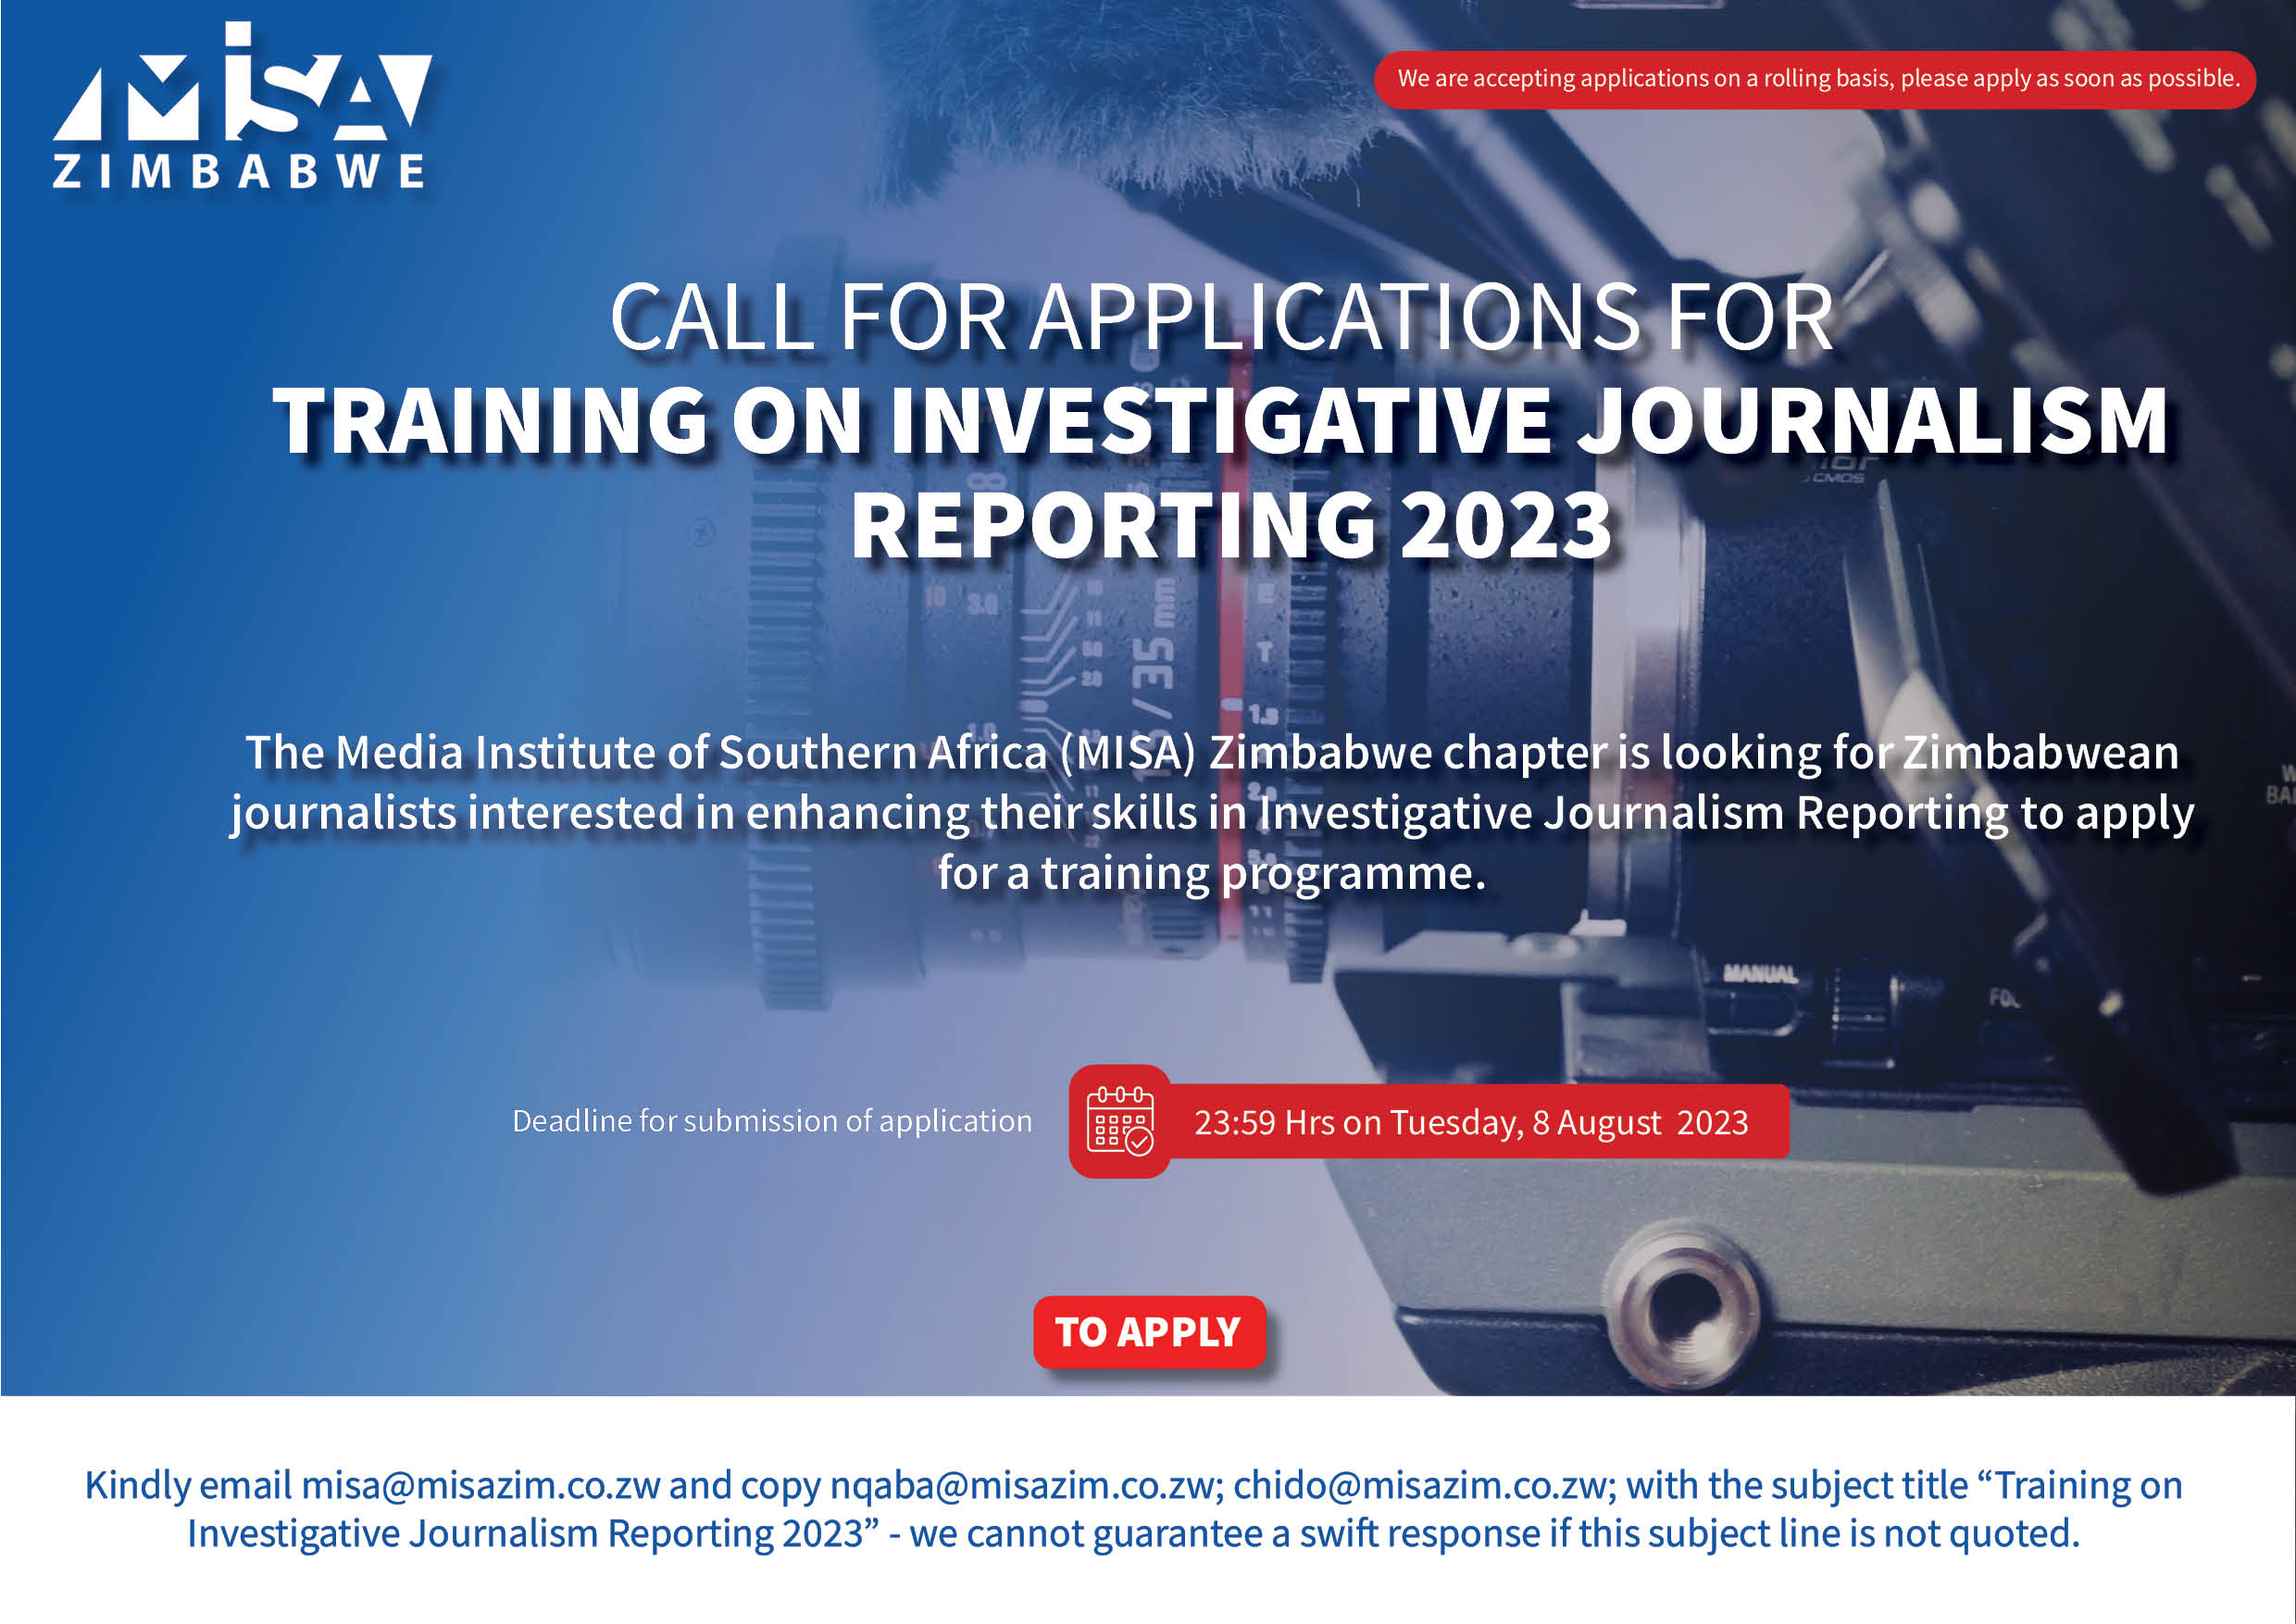 Call for Applications for Training on Investigative Journalism Reporting 2023